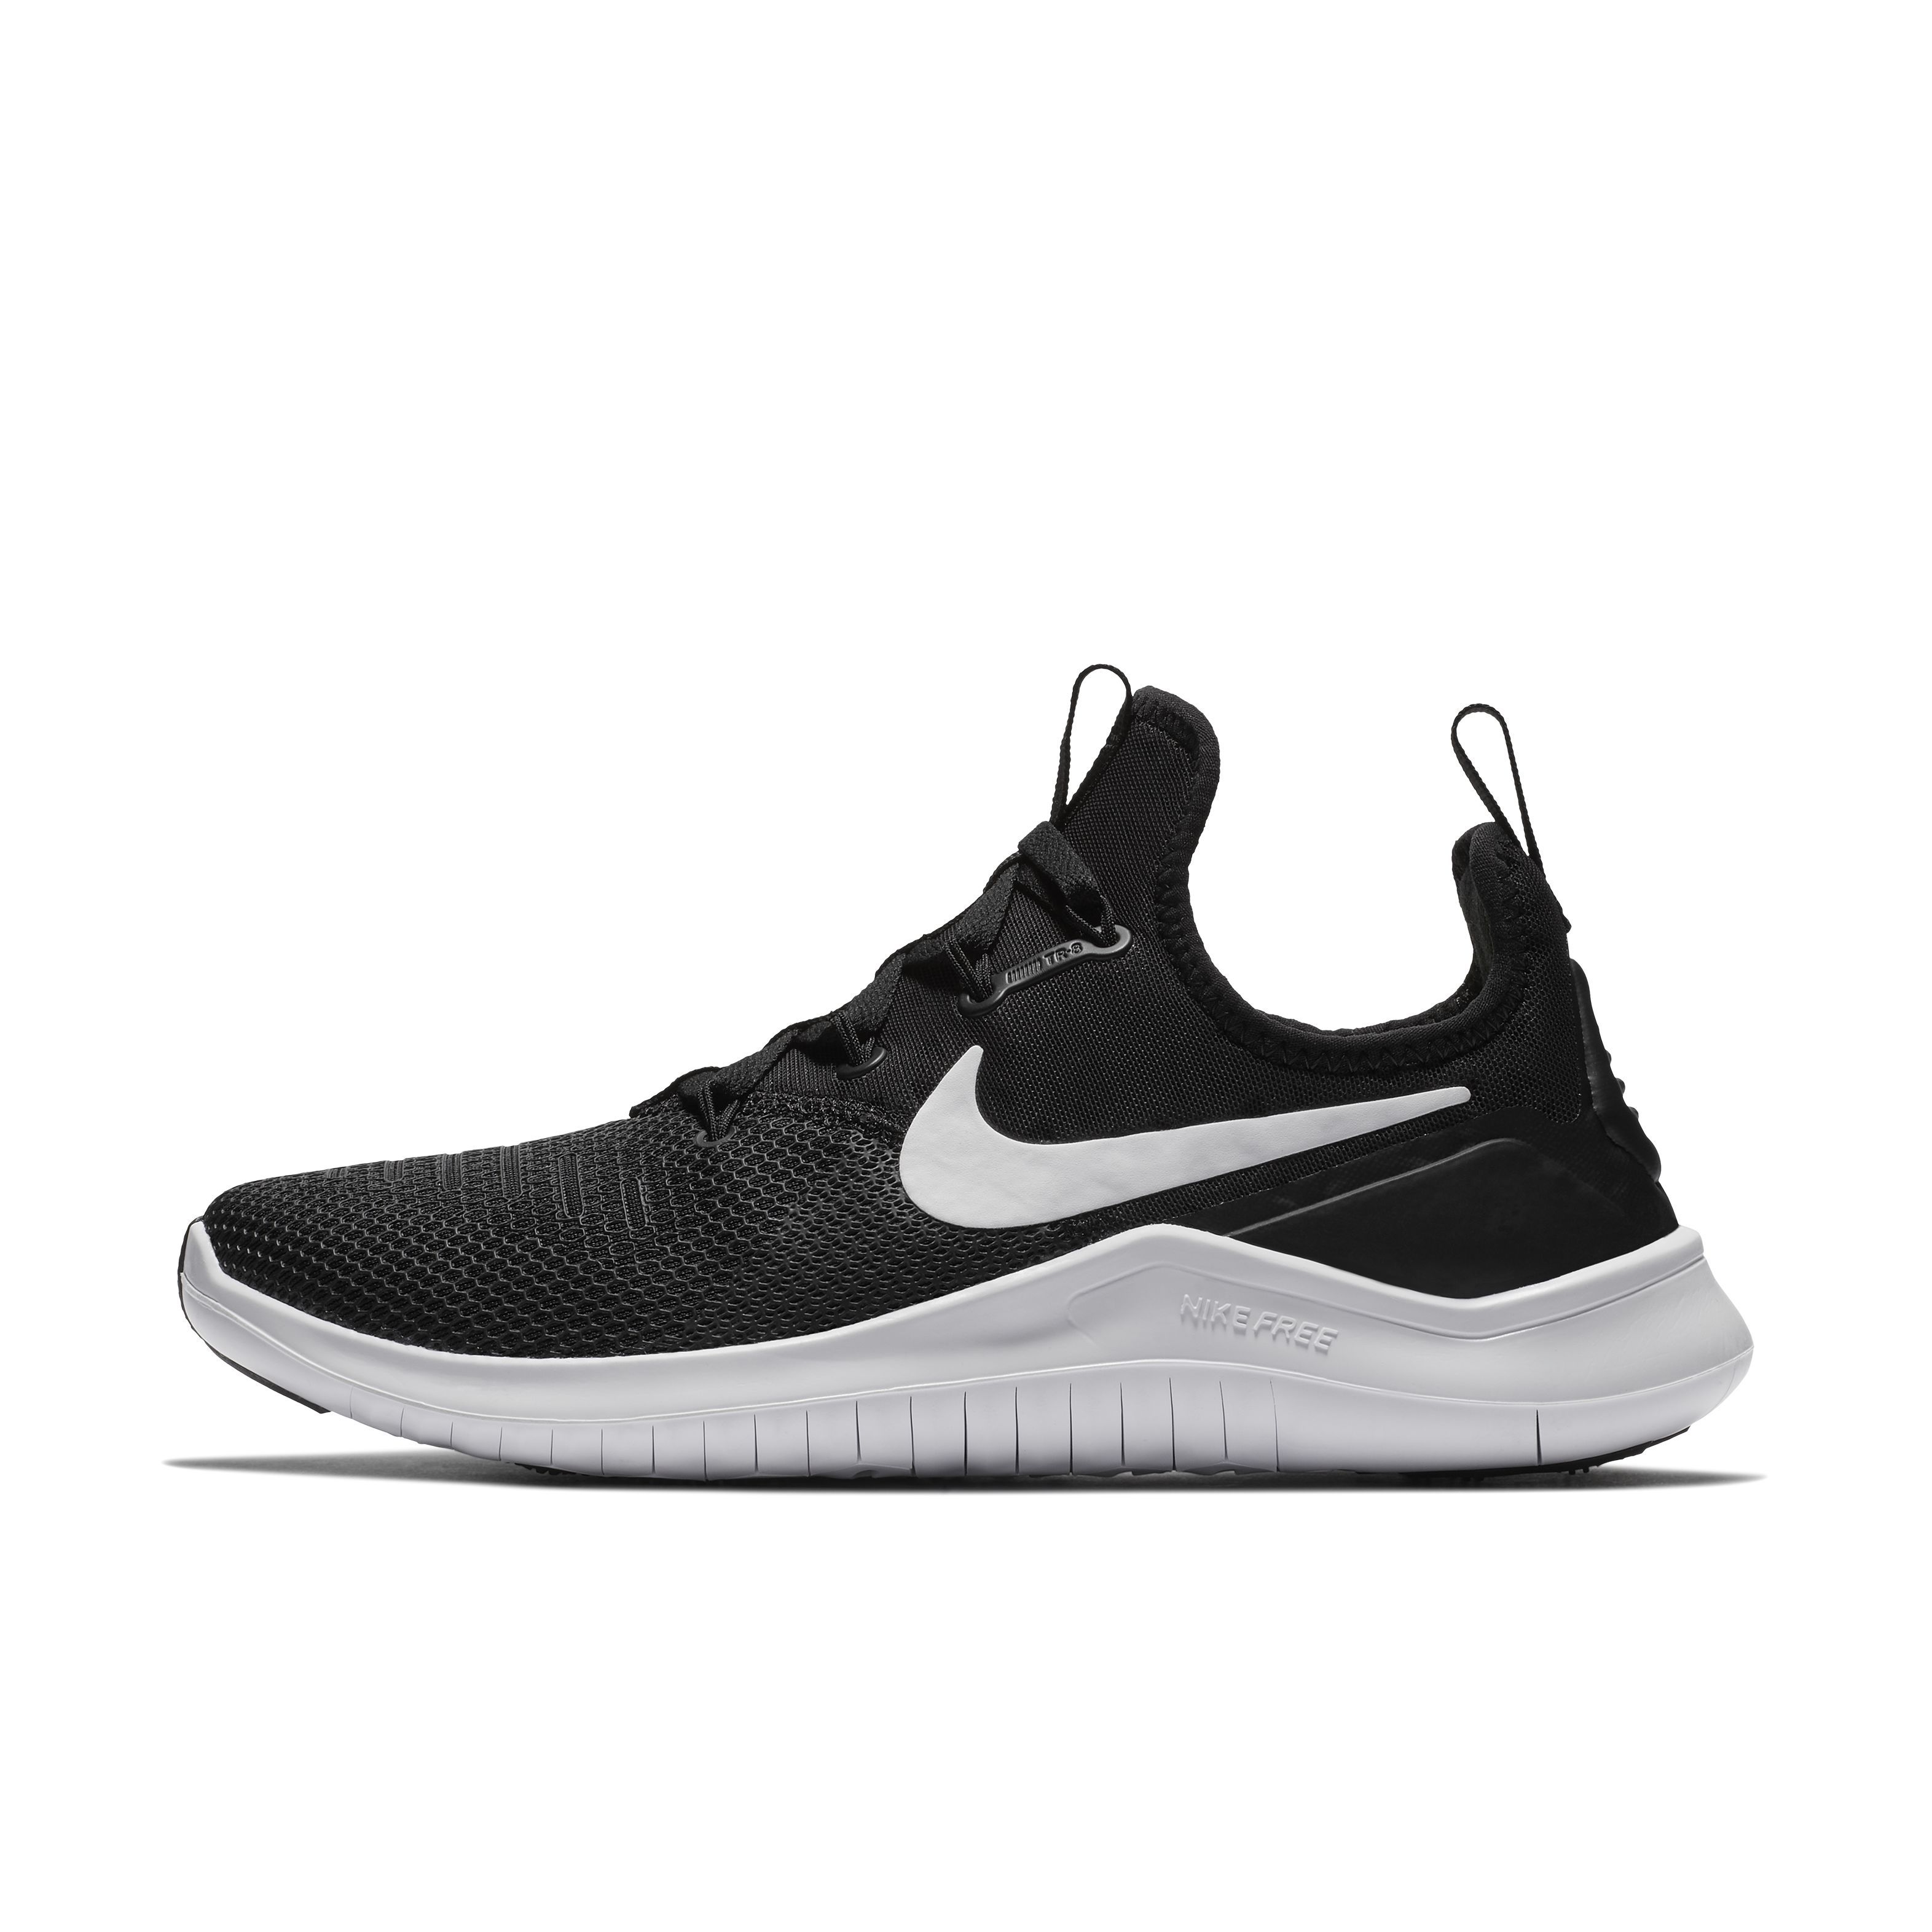 Nike Shoes For Women Sale